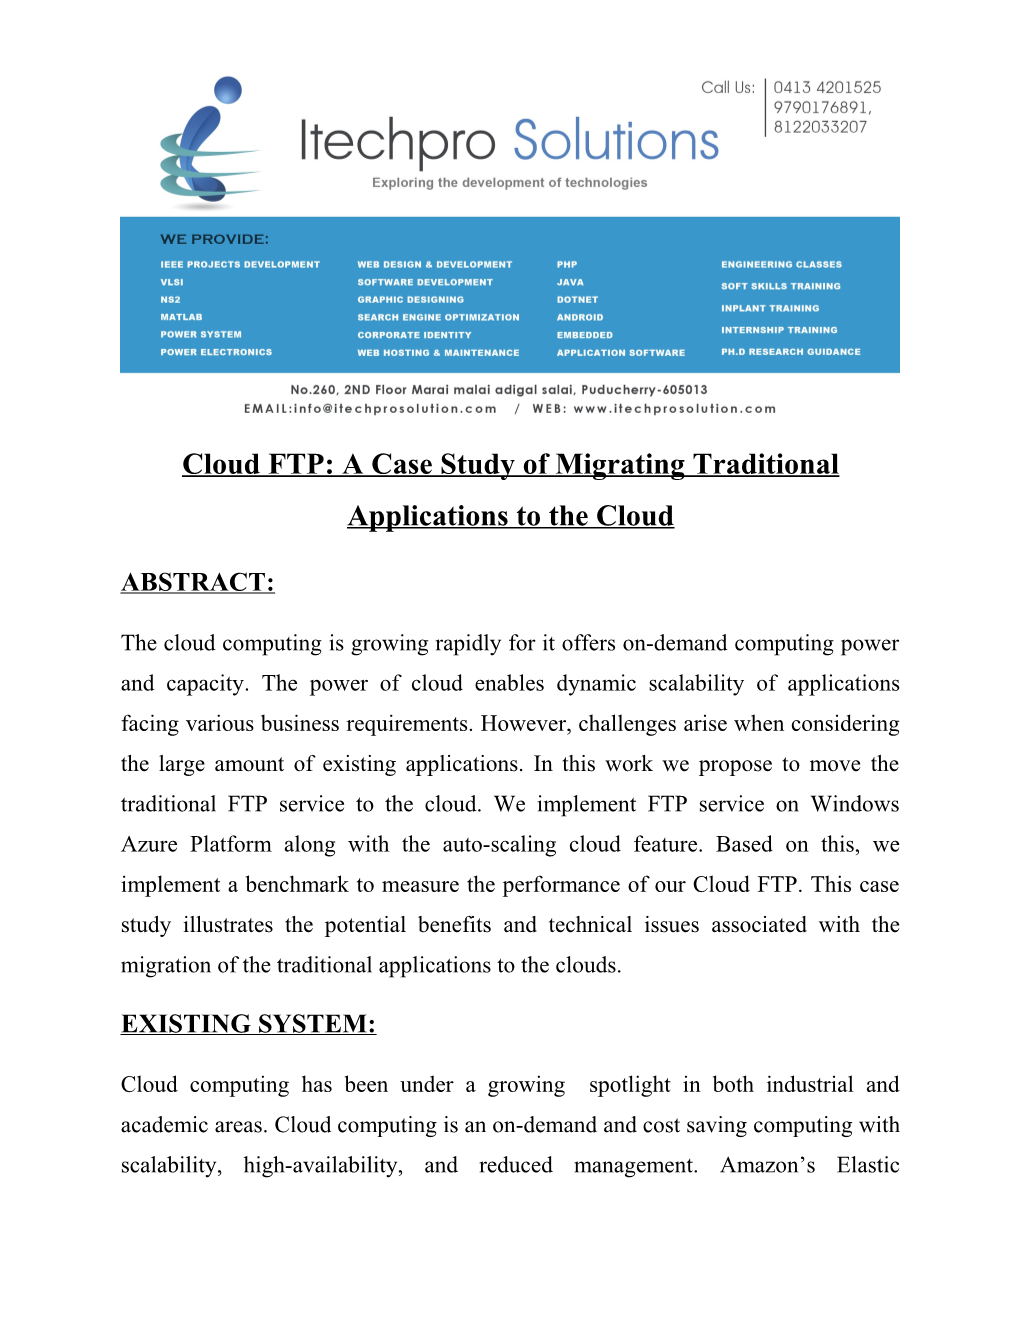 Cloudftp a Case Study of Migrating Traditional Applications to the Cloudcloudftp a Case